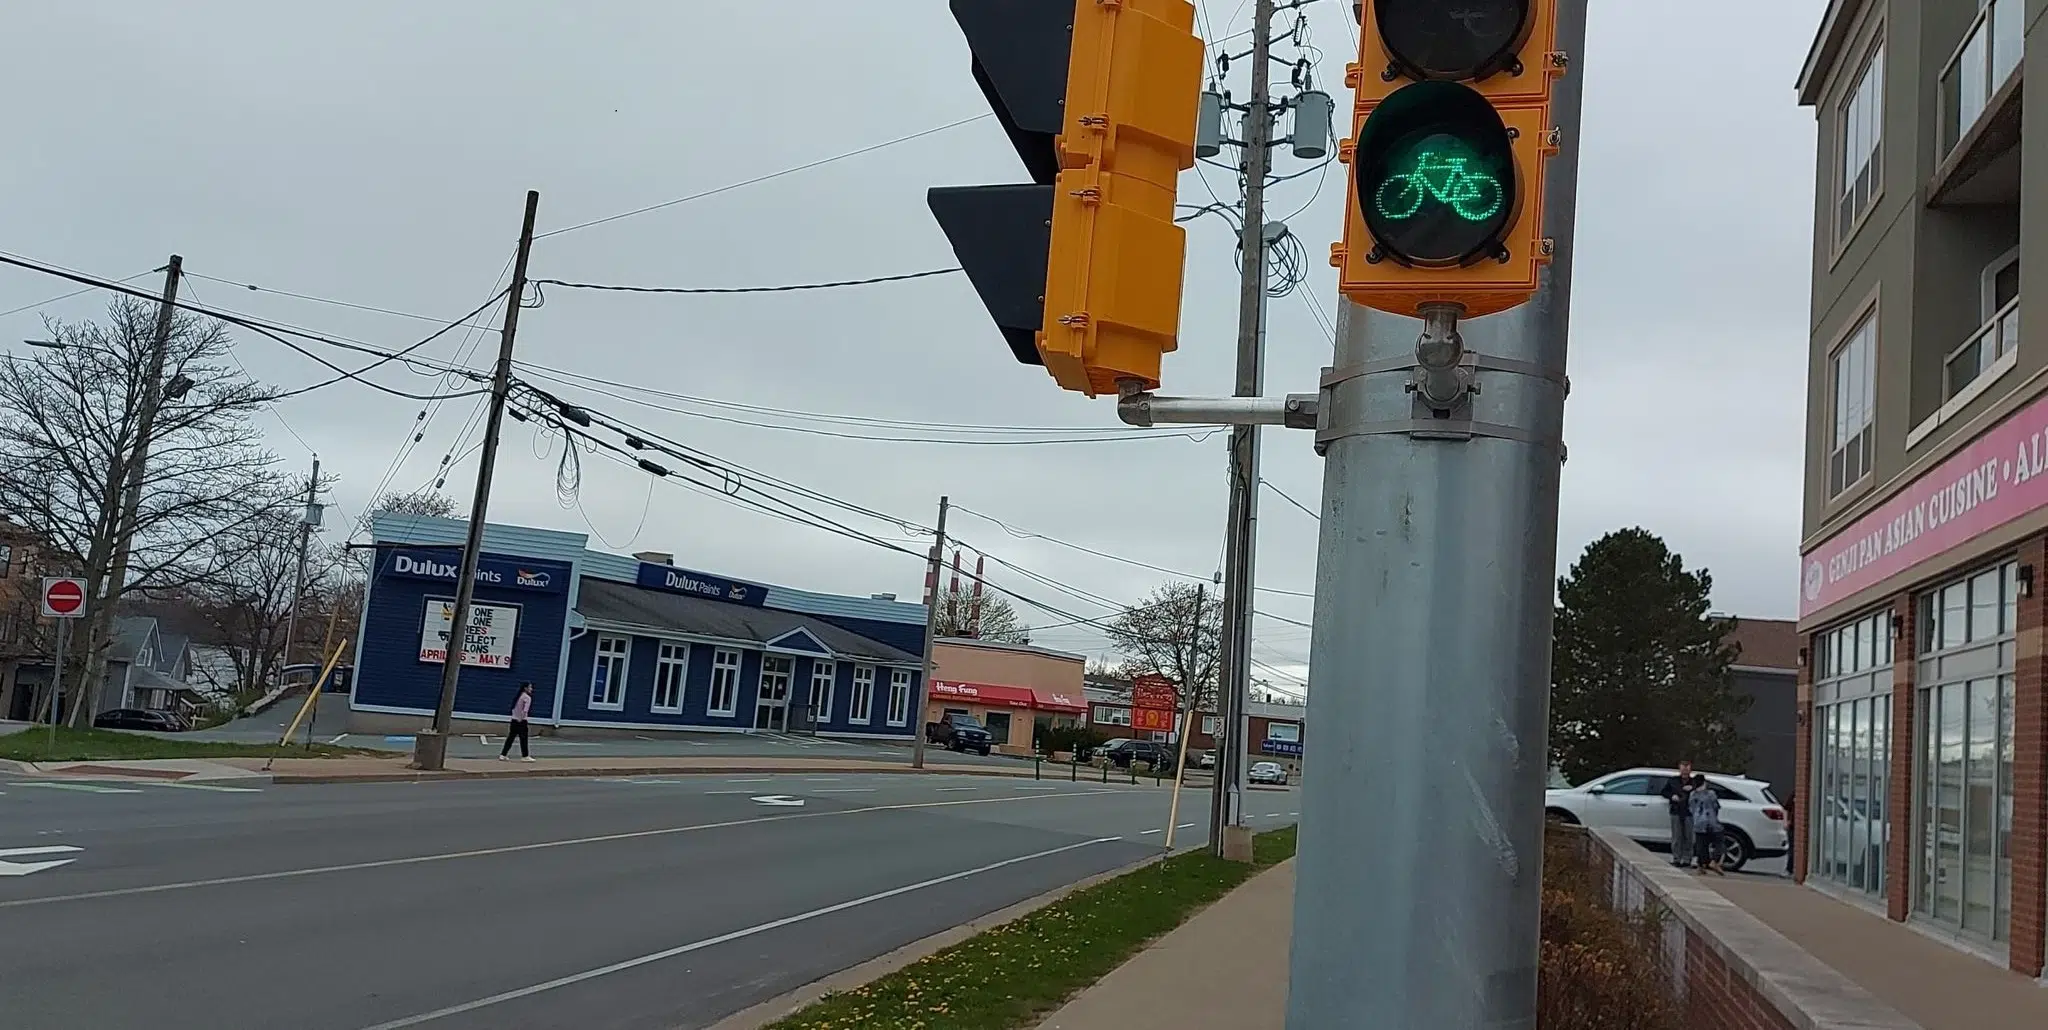 New bicycle signals on Wyse road 'a step in the direction', cycling advocate says